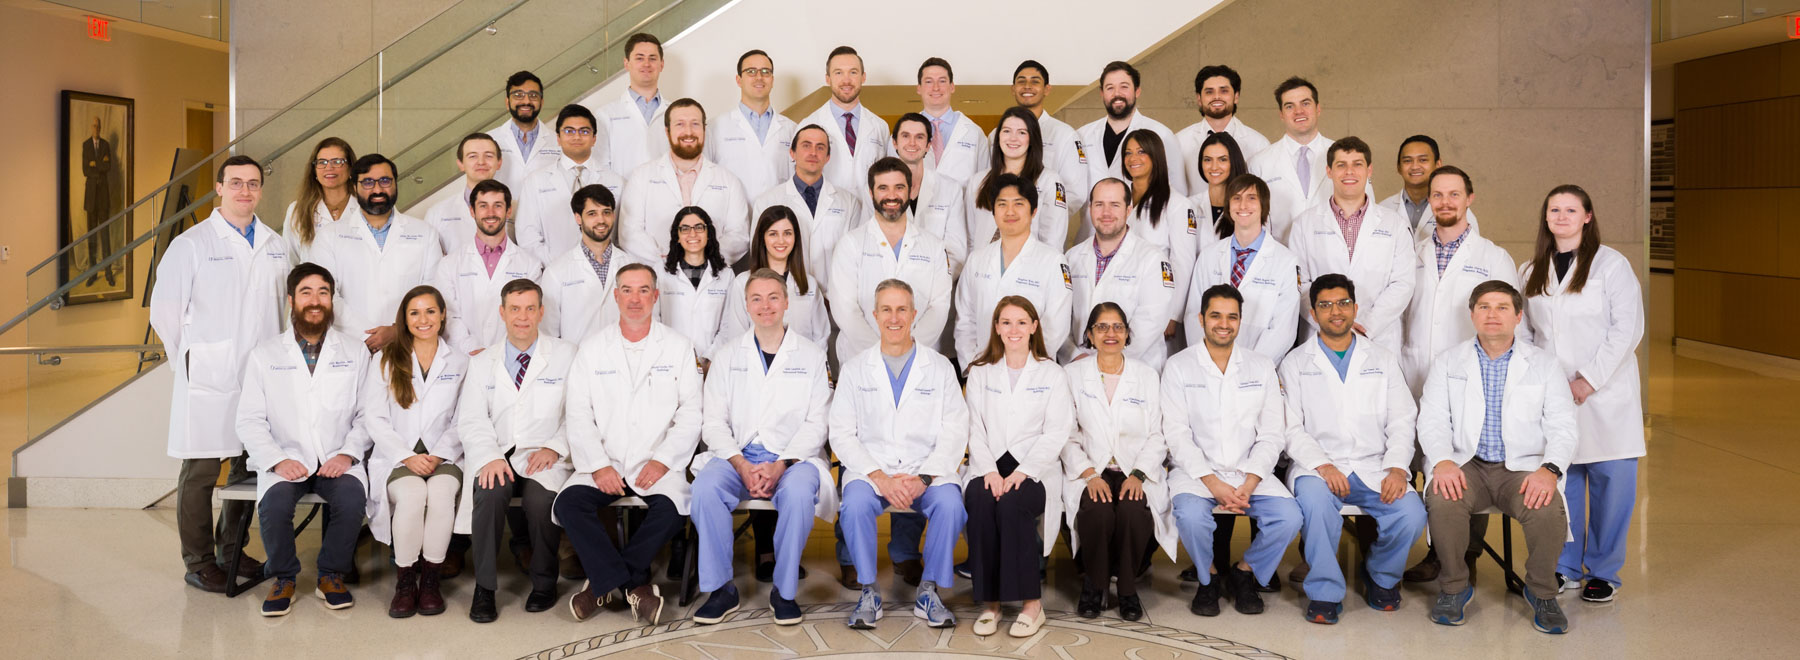 Group photo of University of Mississippi Medical Center Department of Radiology.